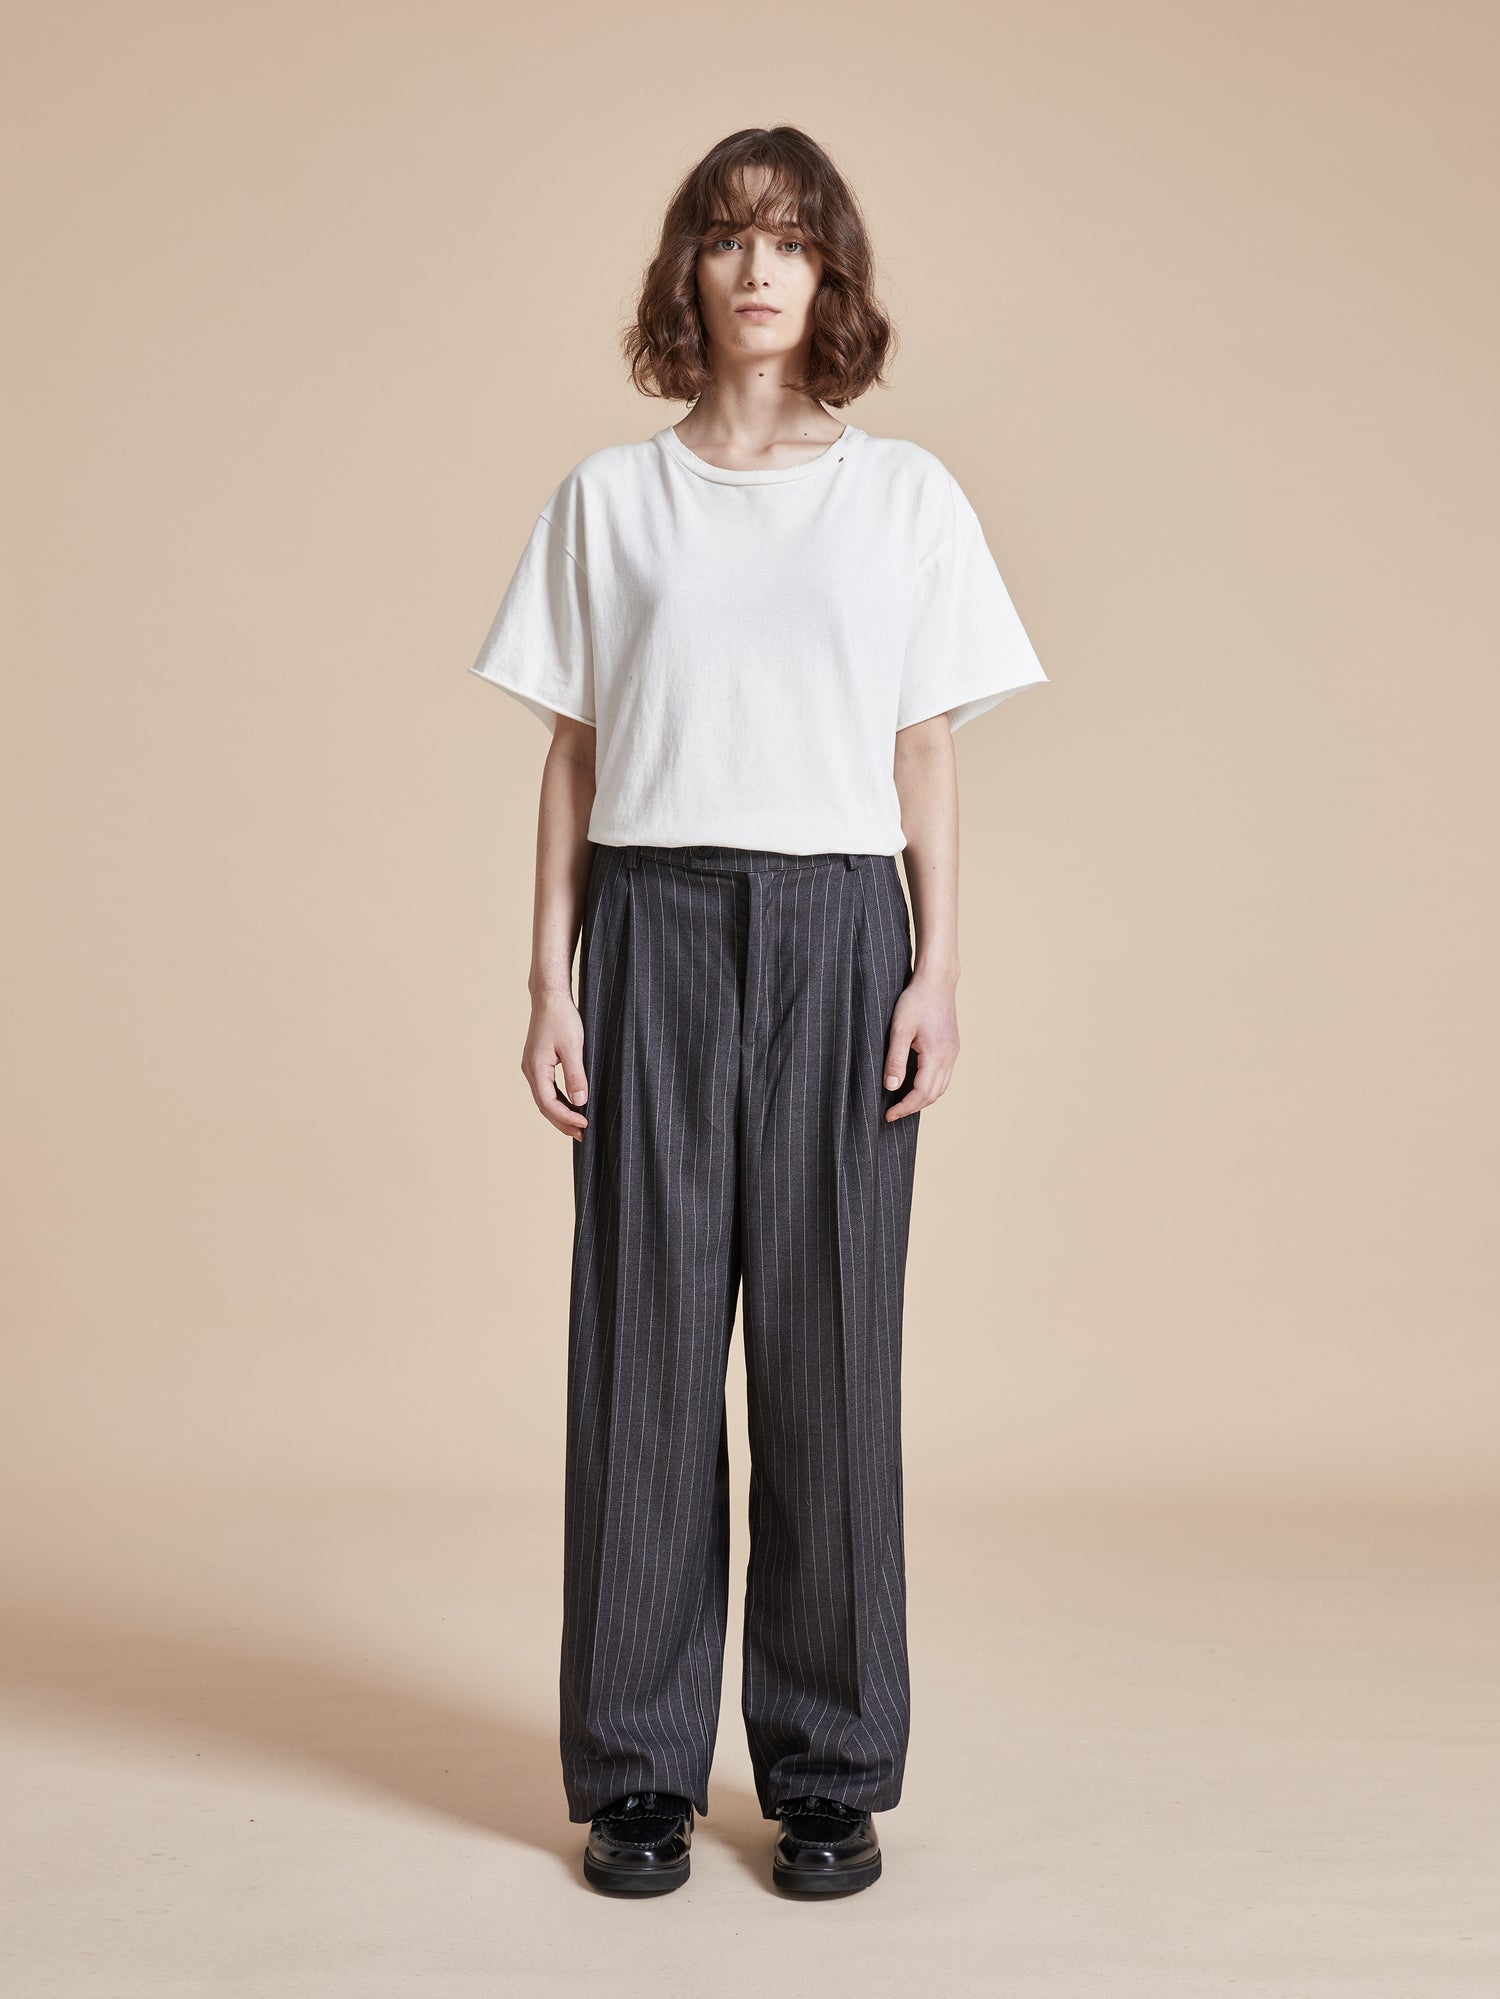 A model wearing a white t-shirt and Found Pinstripe Pleated Trousers.